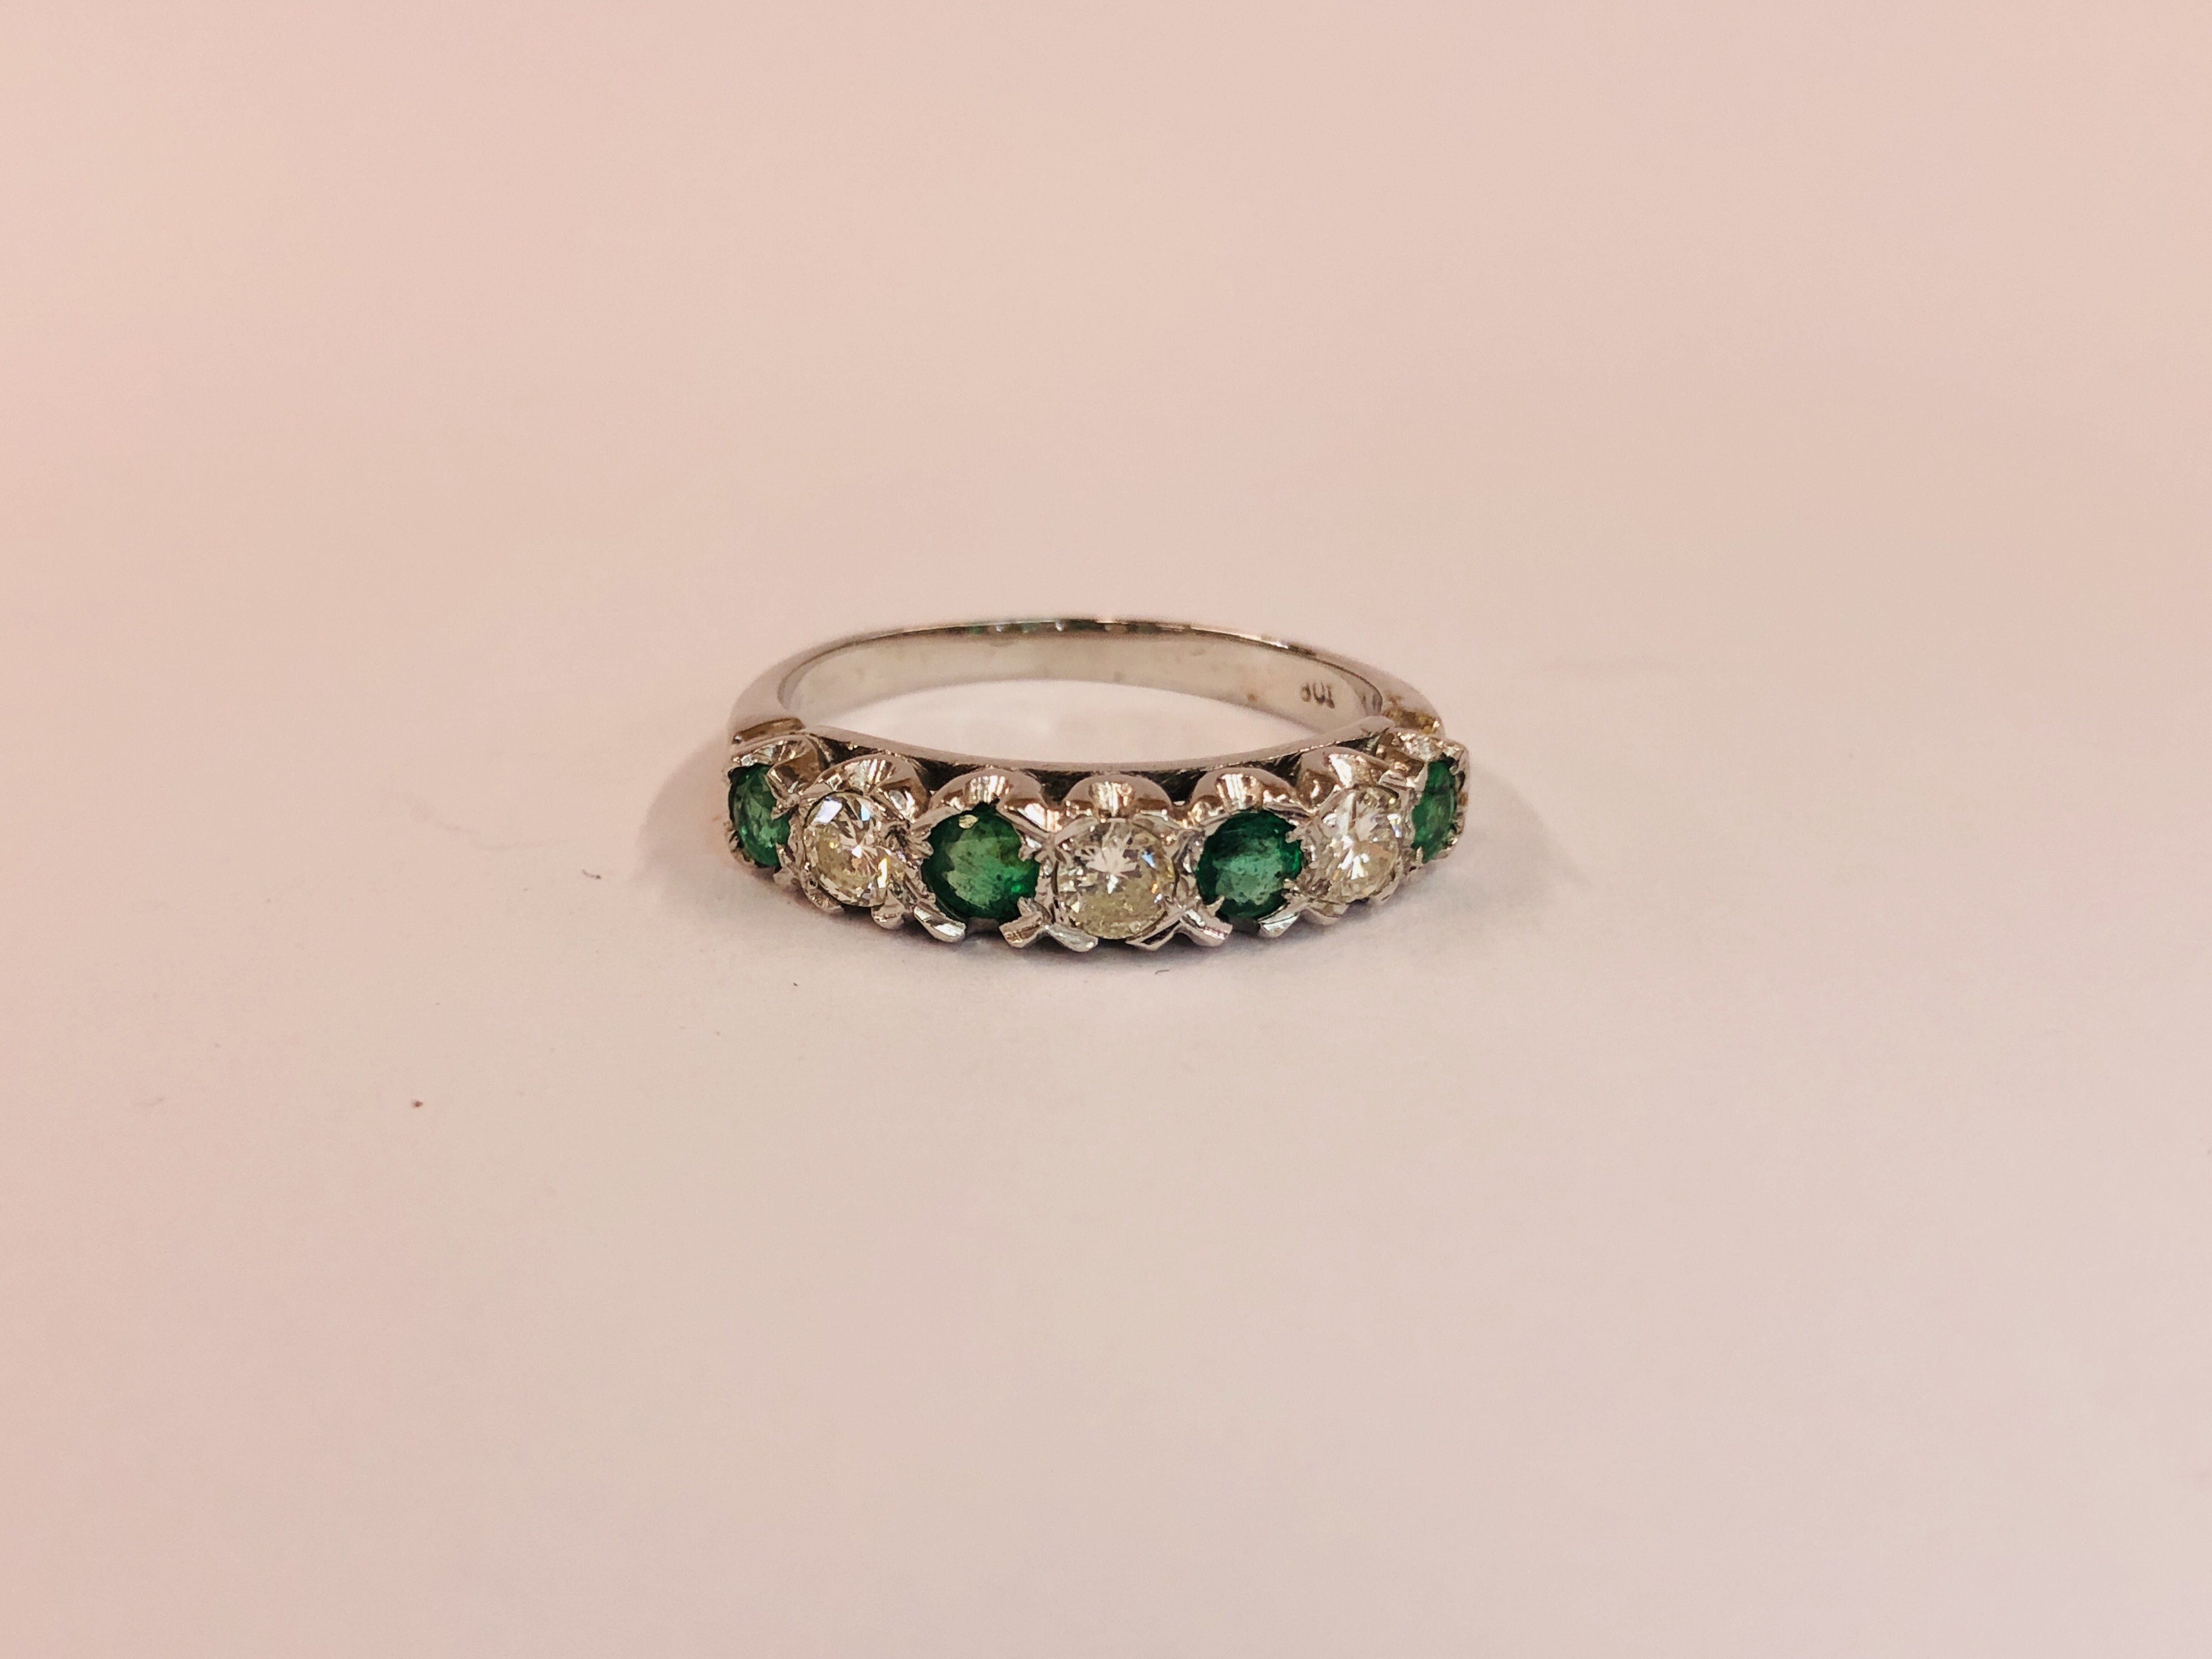 AN 18CT WHITE GOLD EMERALD AND DIAMOND HALF HOOP ETERNITY RING.